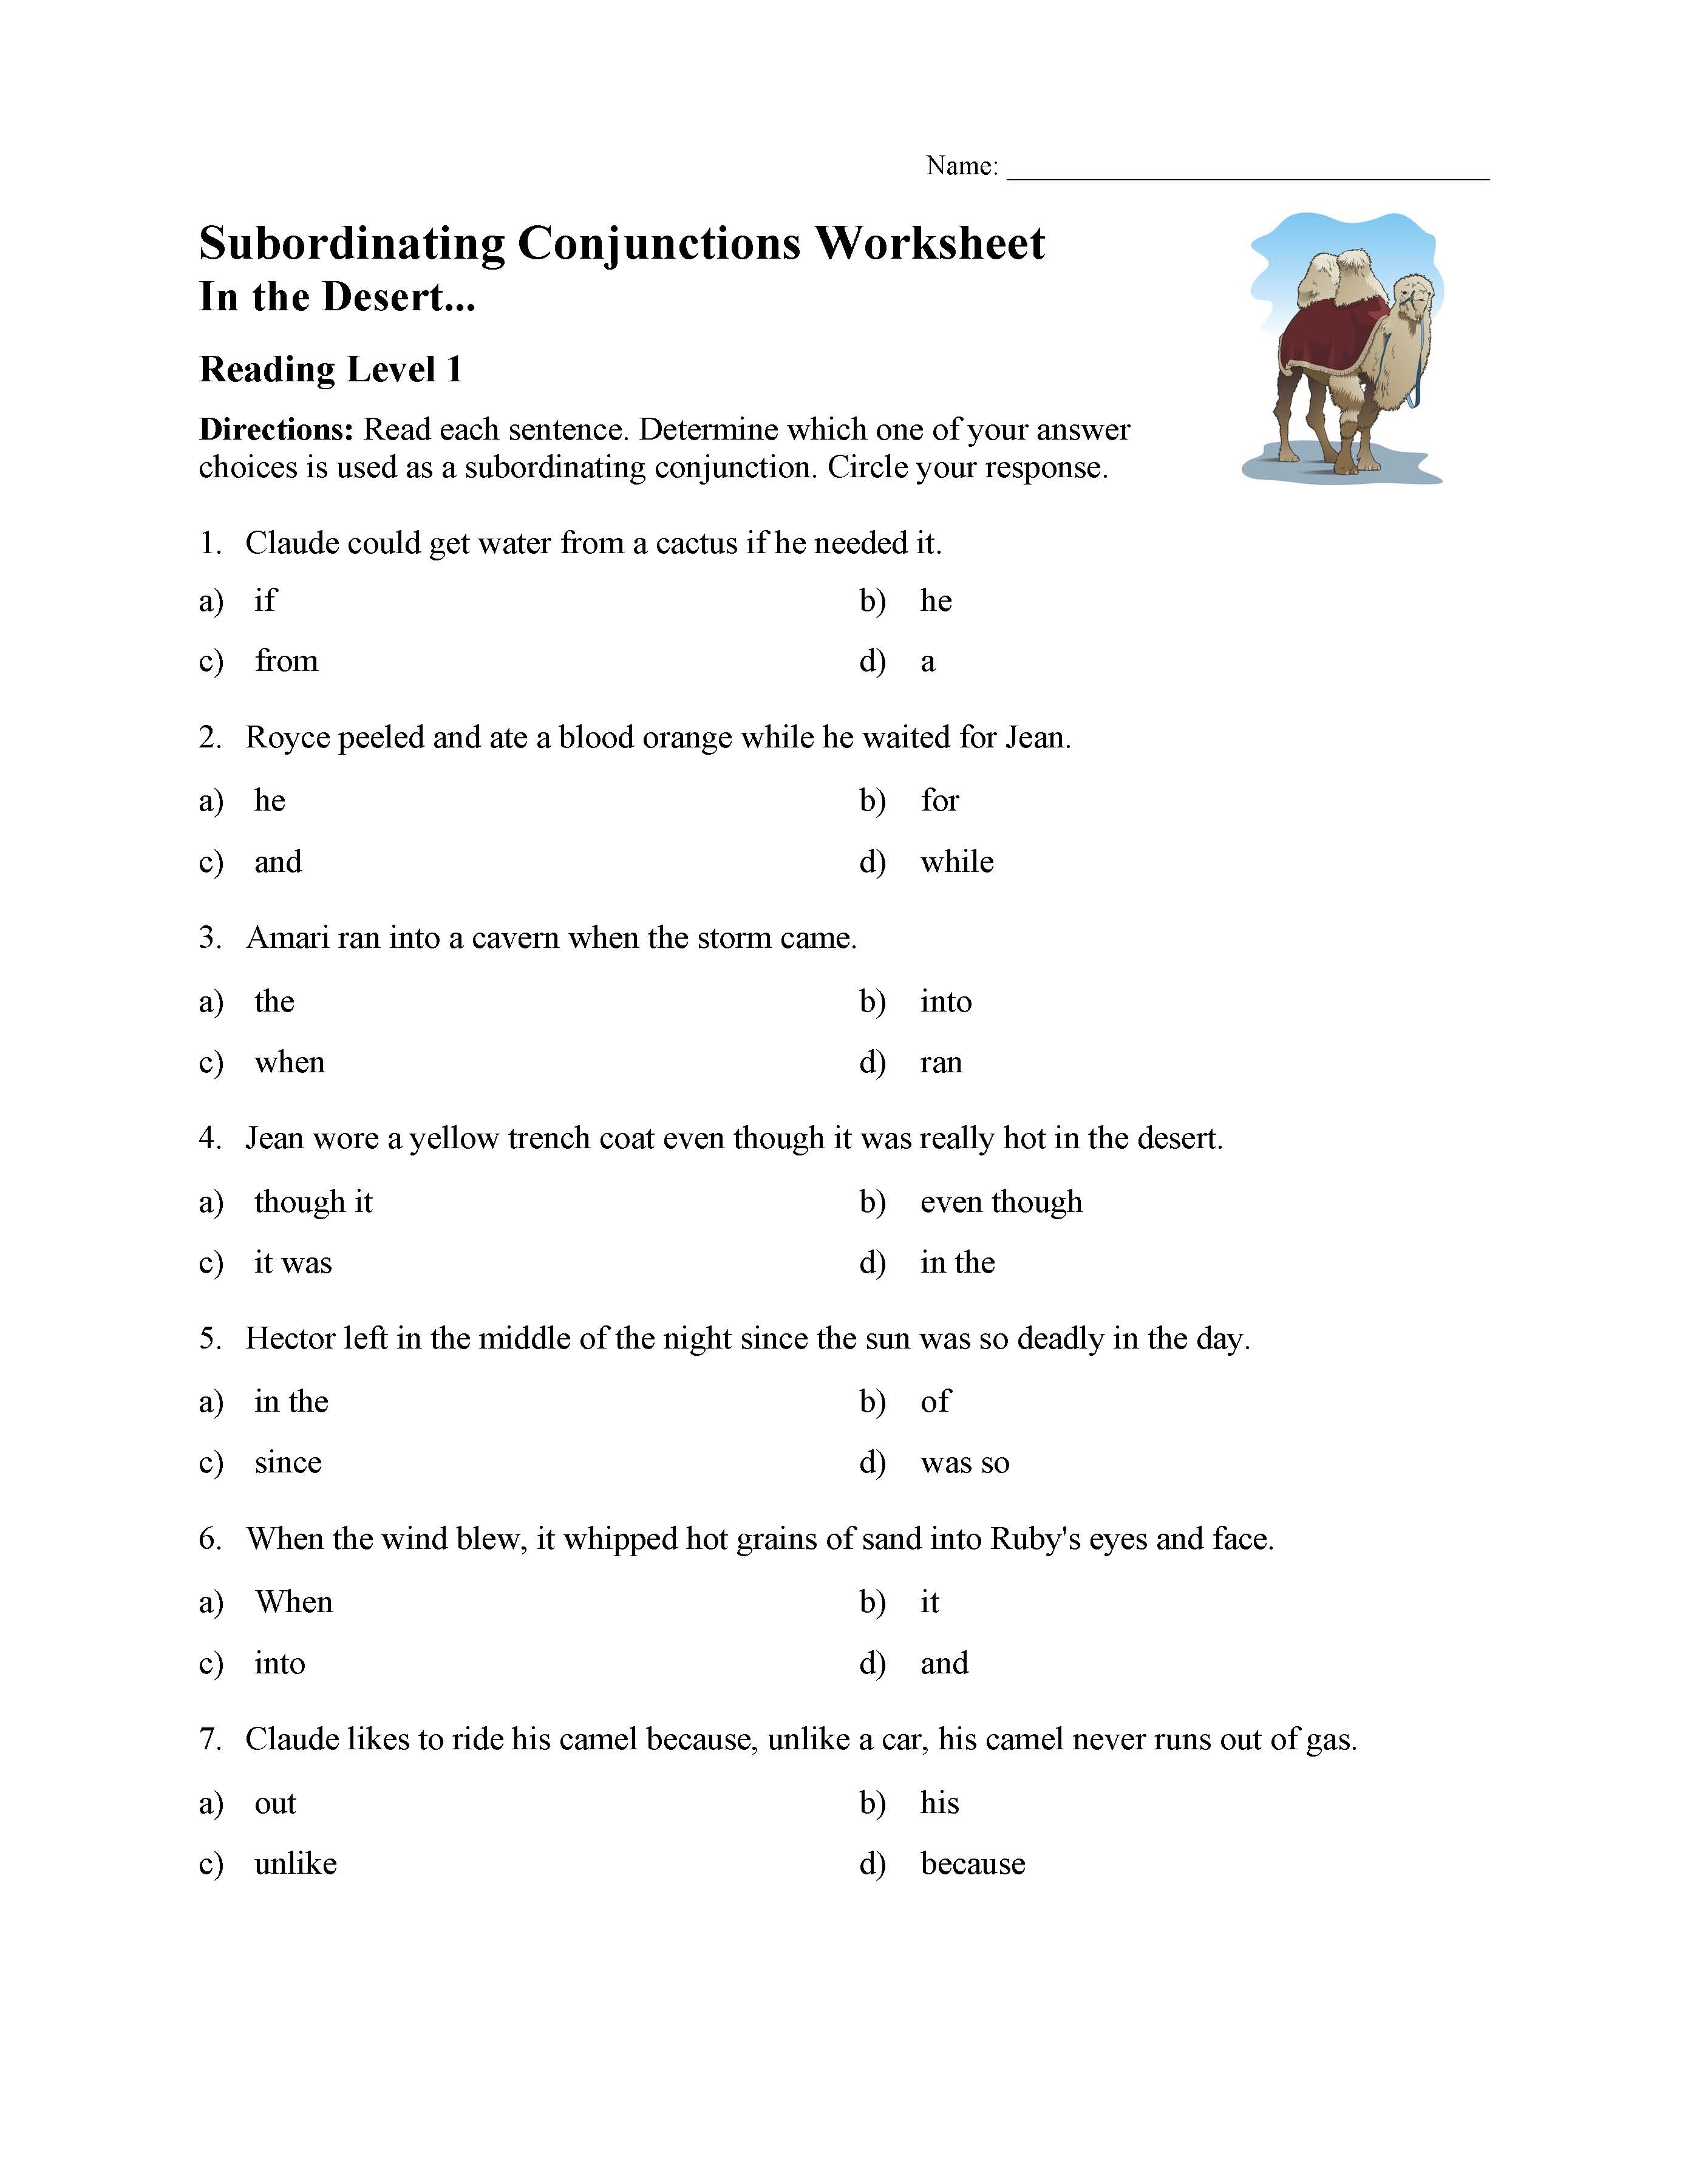 This is a preview image of the Subordinating Conjunctions Worksheet - Reading Level 1.